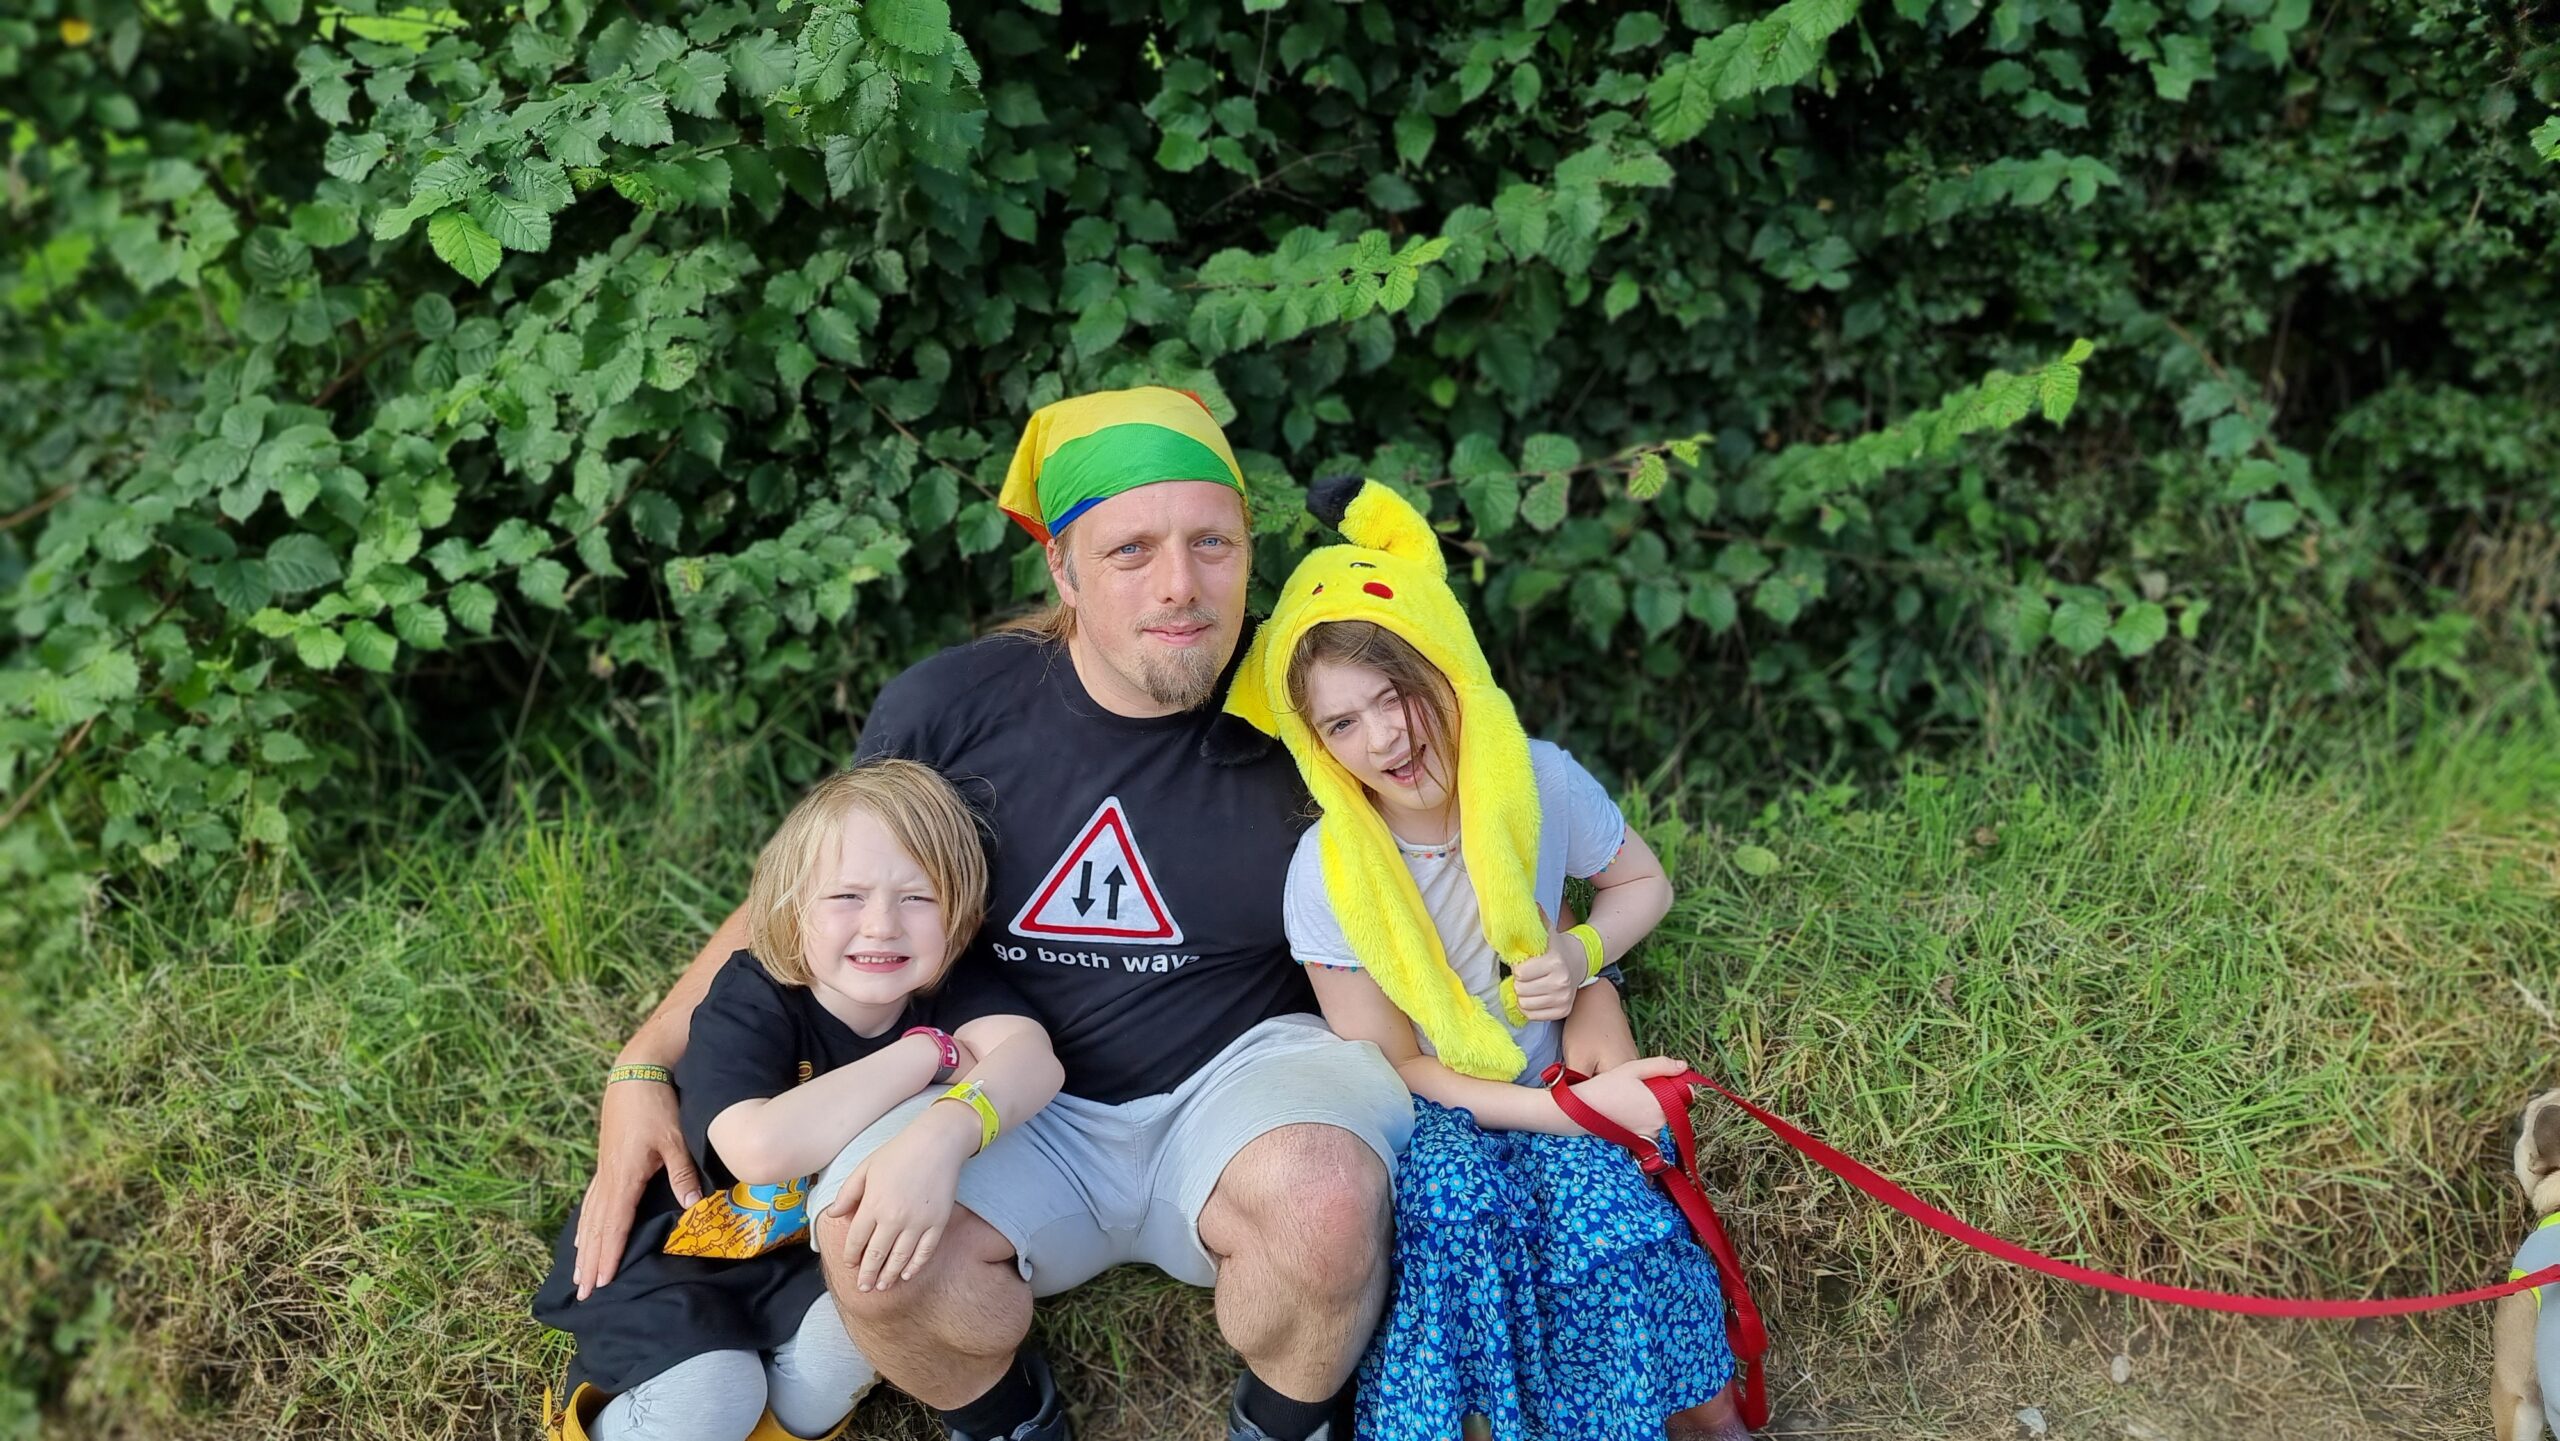 Photograph showing Dan, wearing a "go both ways" t-shirt and a rainbow-striped bandana and grey shorts, sits between a 6-year-old boy and a 9-year-old girl (the girl is wearing a Pikachu hat).